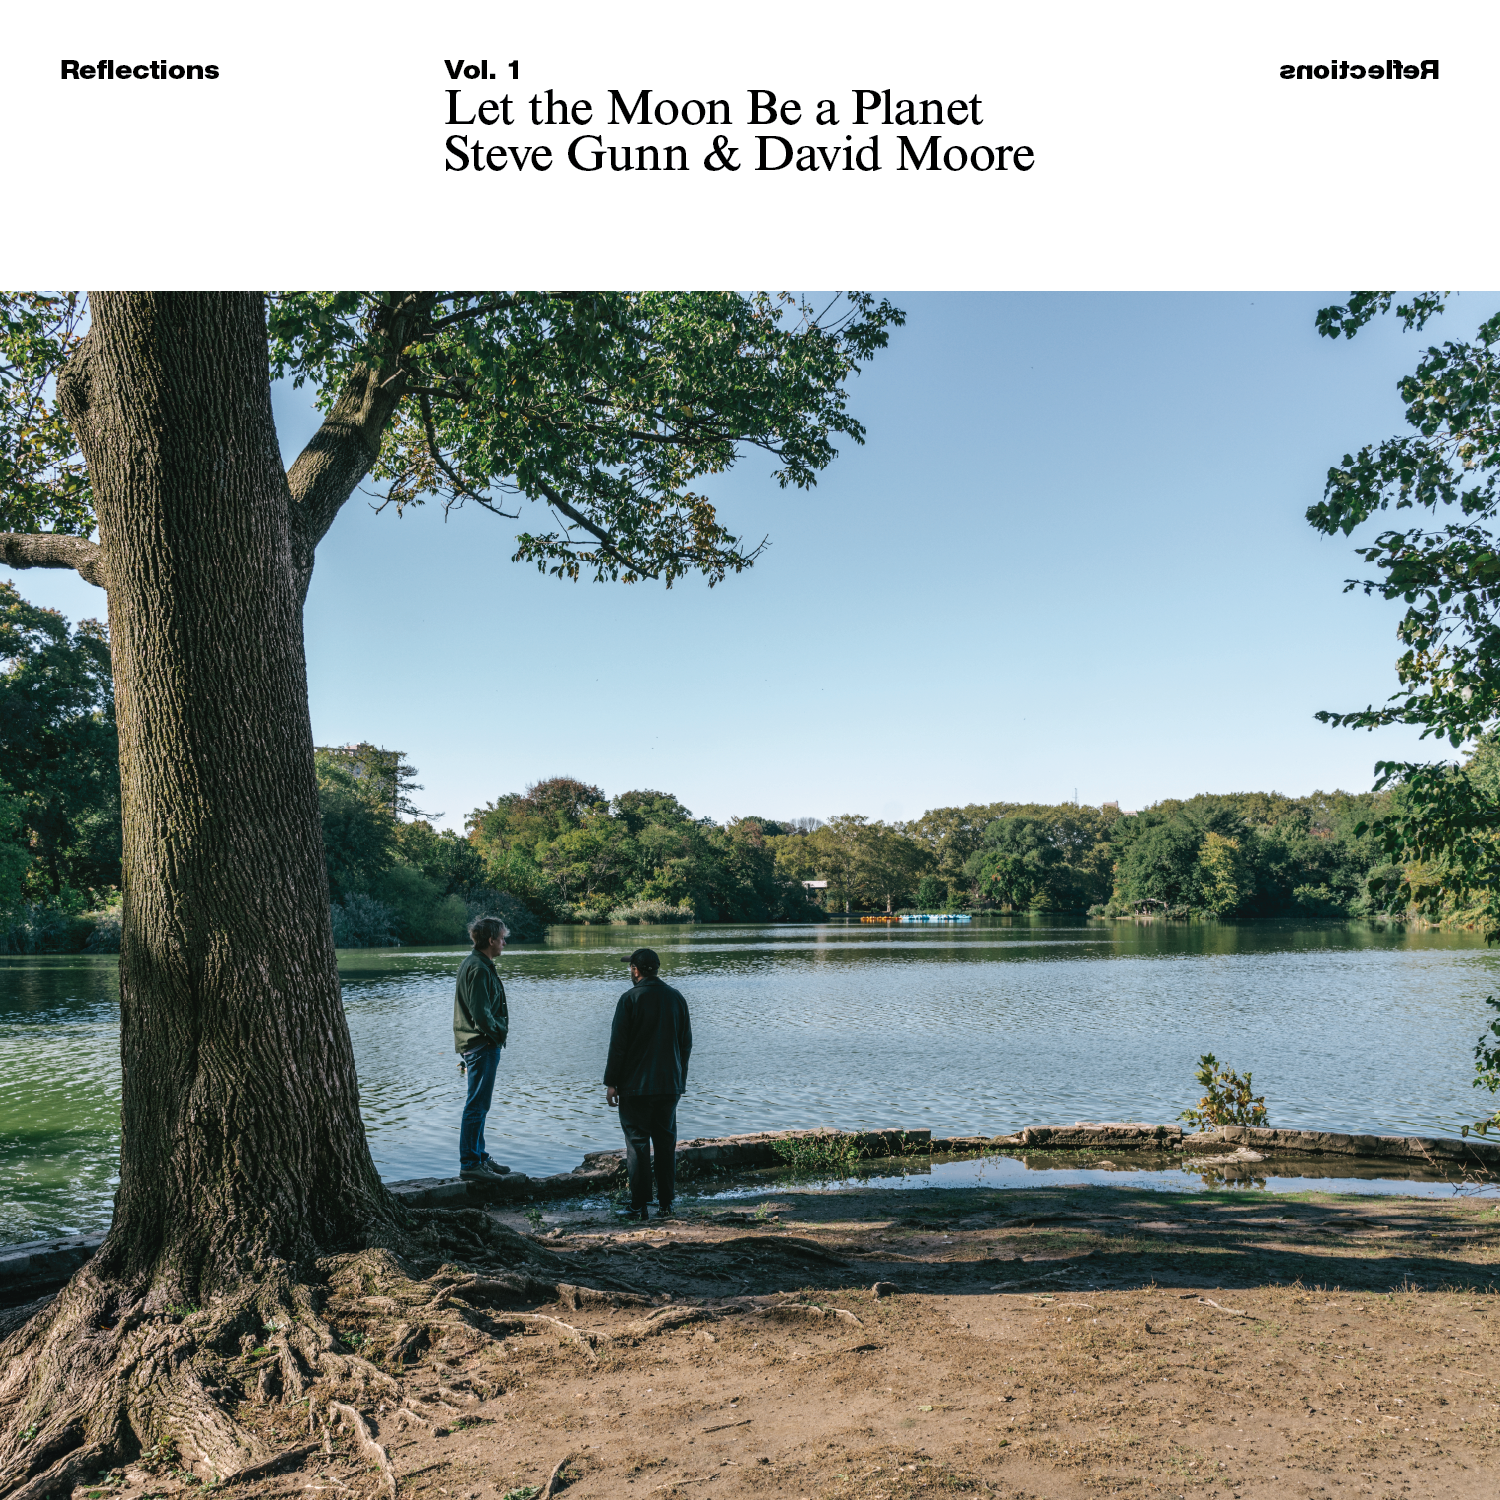 Image for Reflections Vol. 1: Steve Gunn & David Moore – Let the Moon Be a Planet